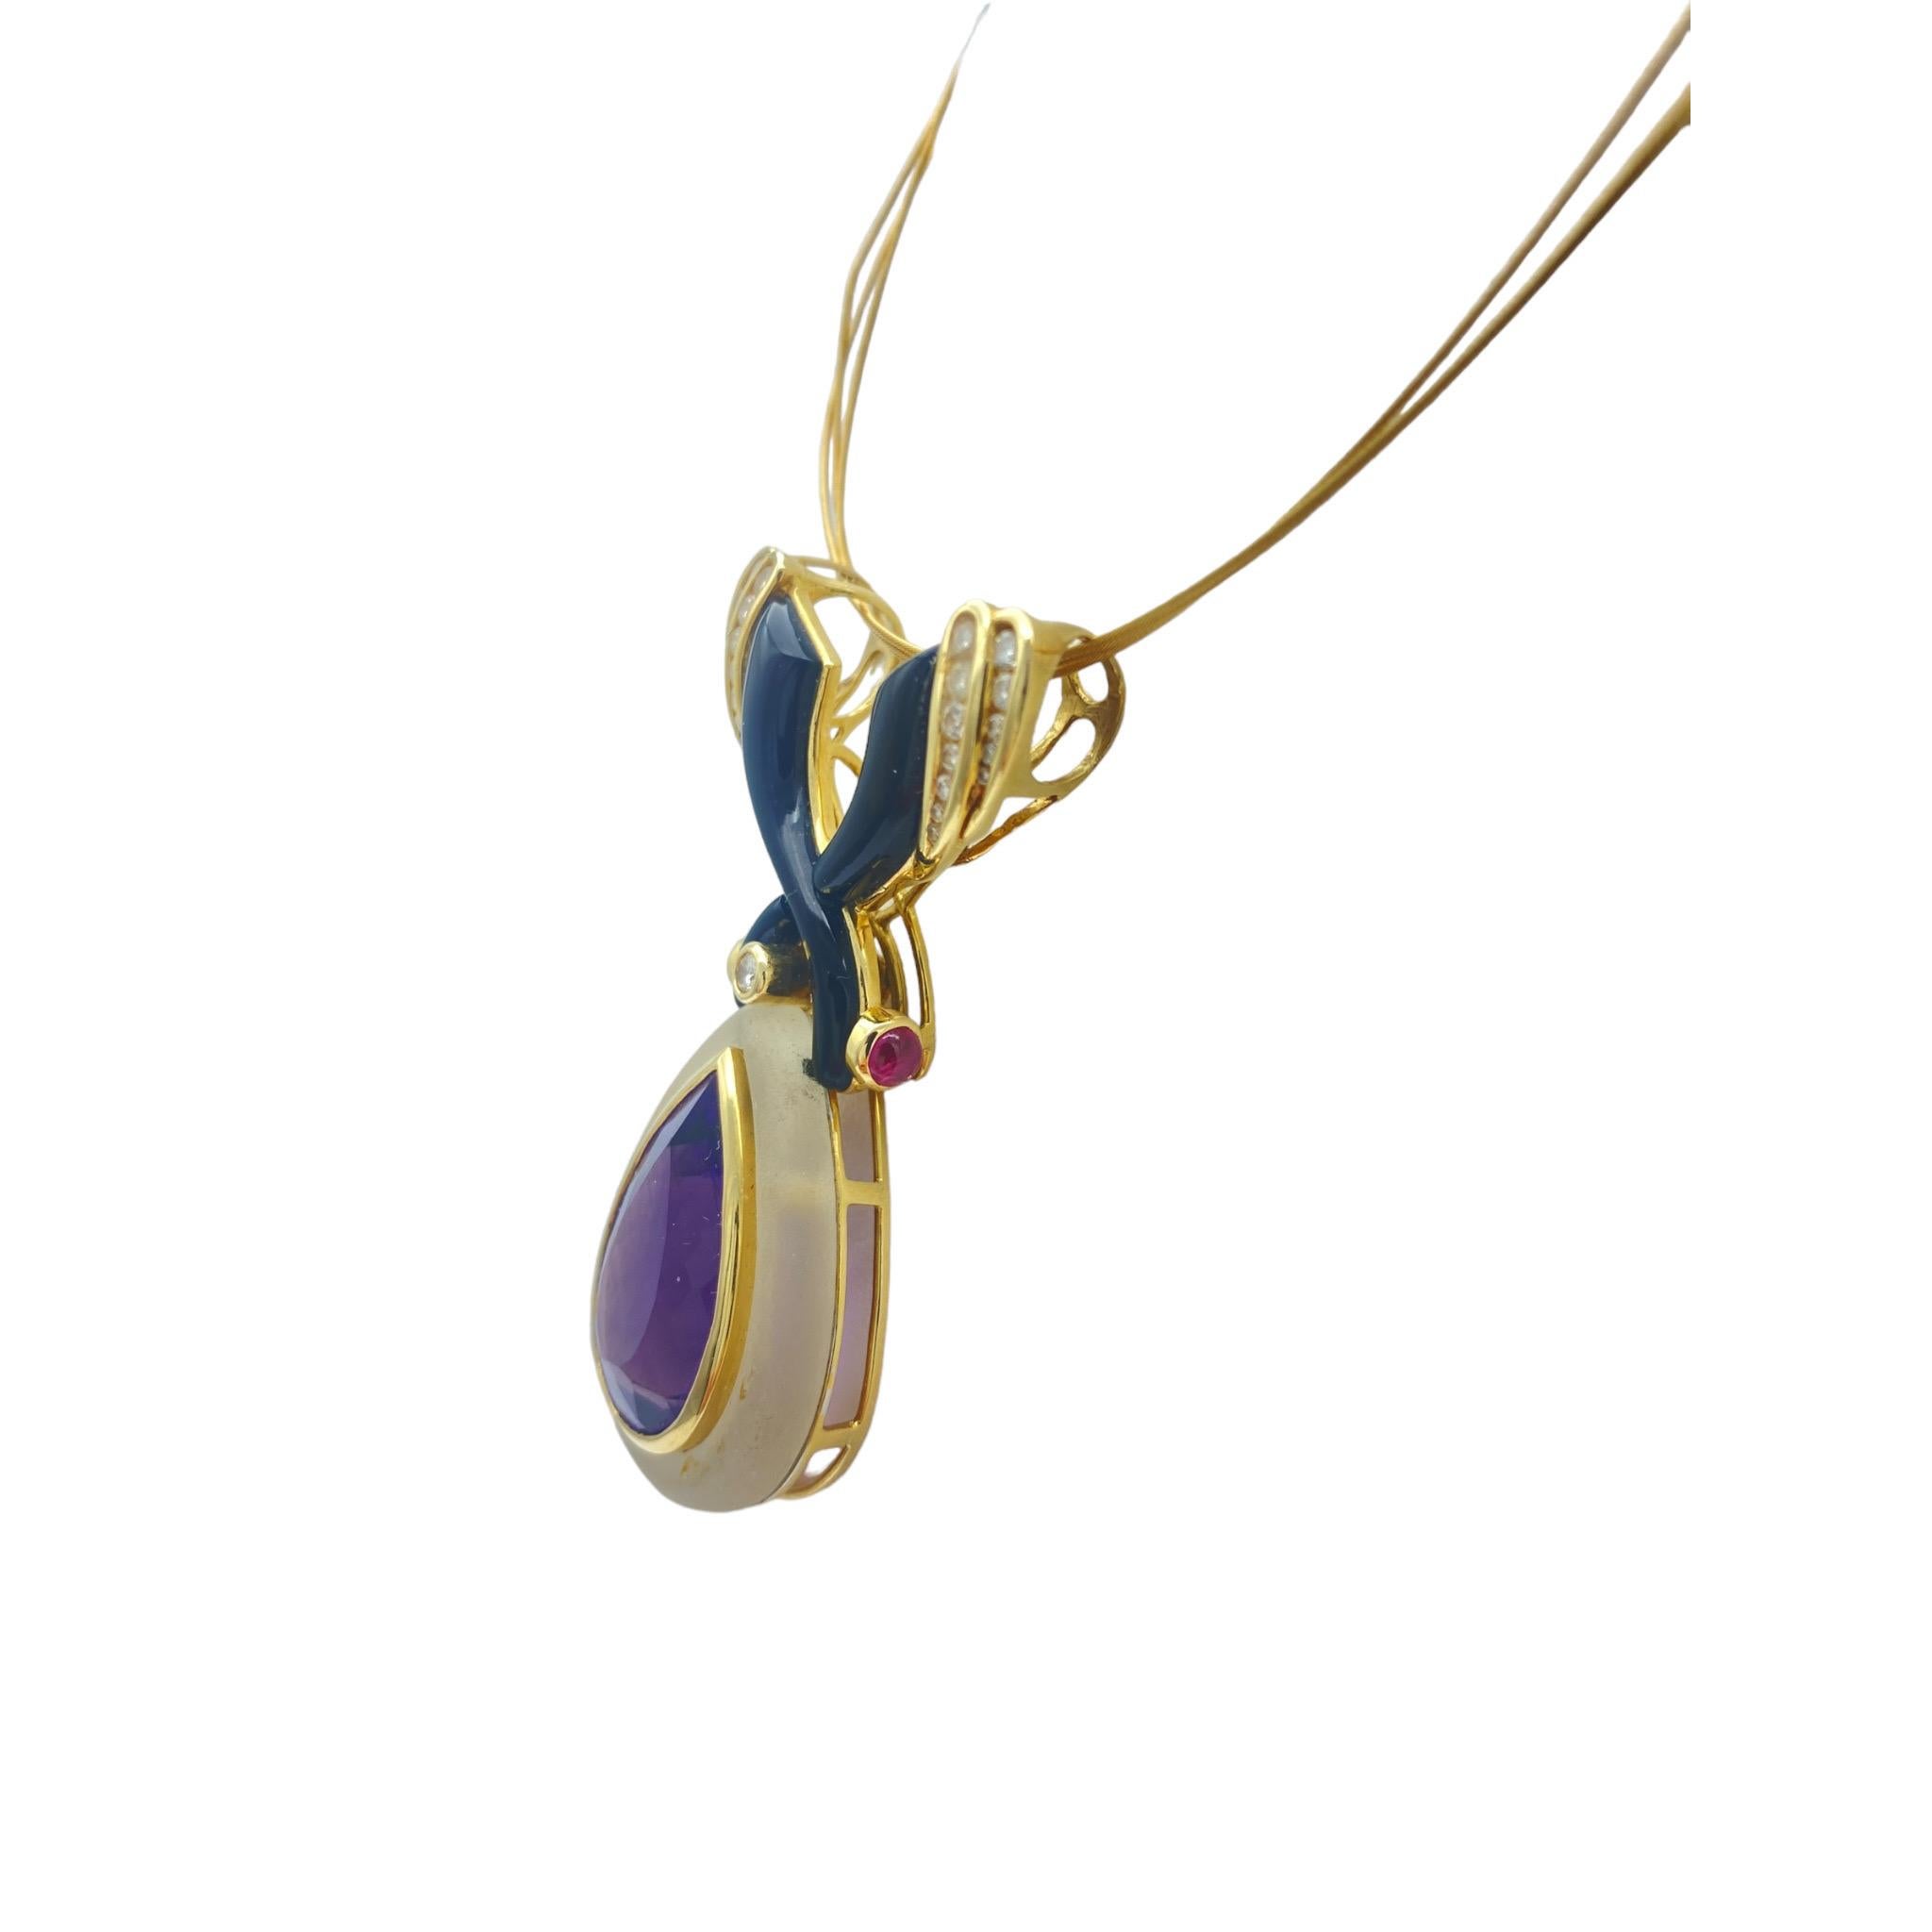 Art Deco pendant is dramatically displayed surrounding a pear-shaped purple amethyst. Encompassing the center is an iced-quartz stone suspended by black onyx carved in an X shape. Diamonds are set in rows that break on a triple-row gold necklace